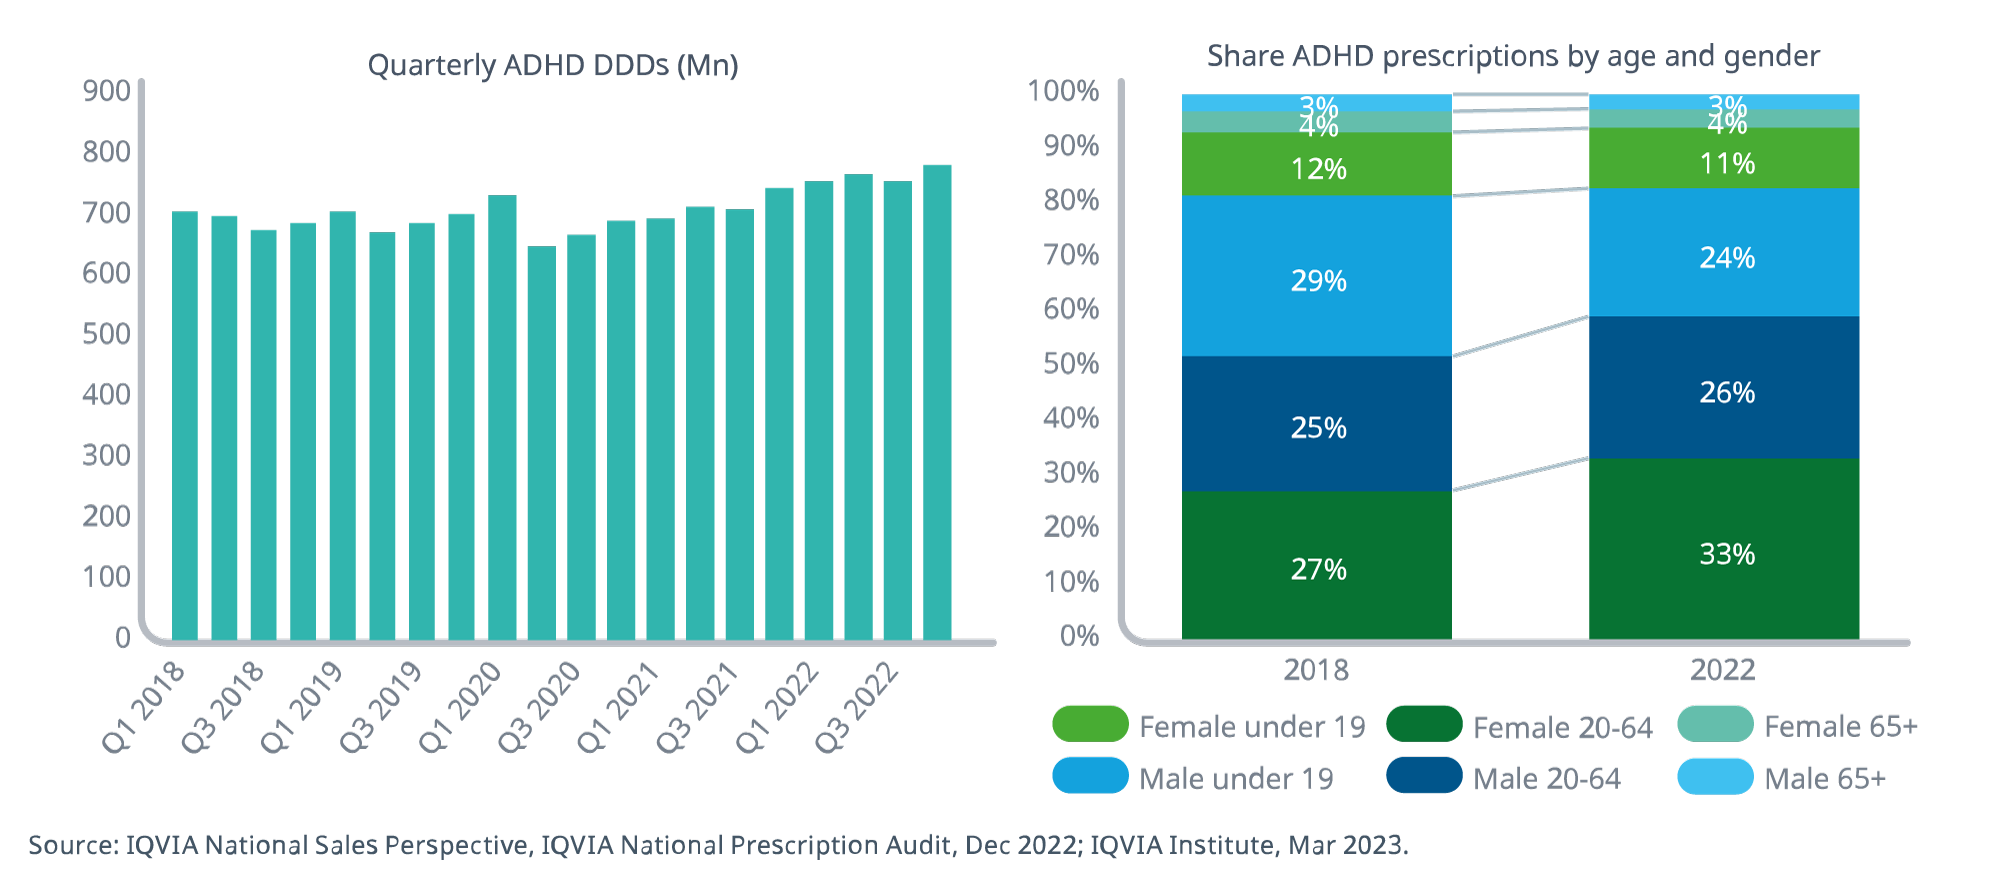 Figure 2. ADHD defined daily doses (DDDs) and share of prescriptions by age and gender from 2018–2022. Image courtesy of IQVIA.